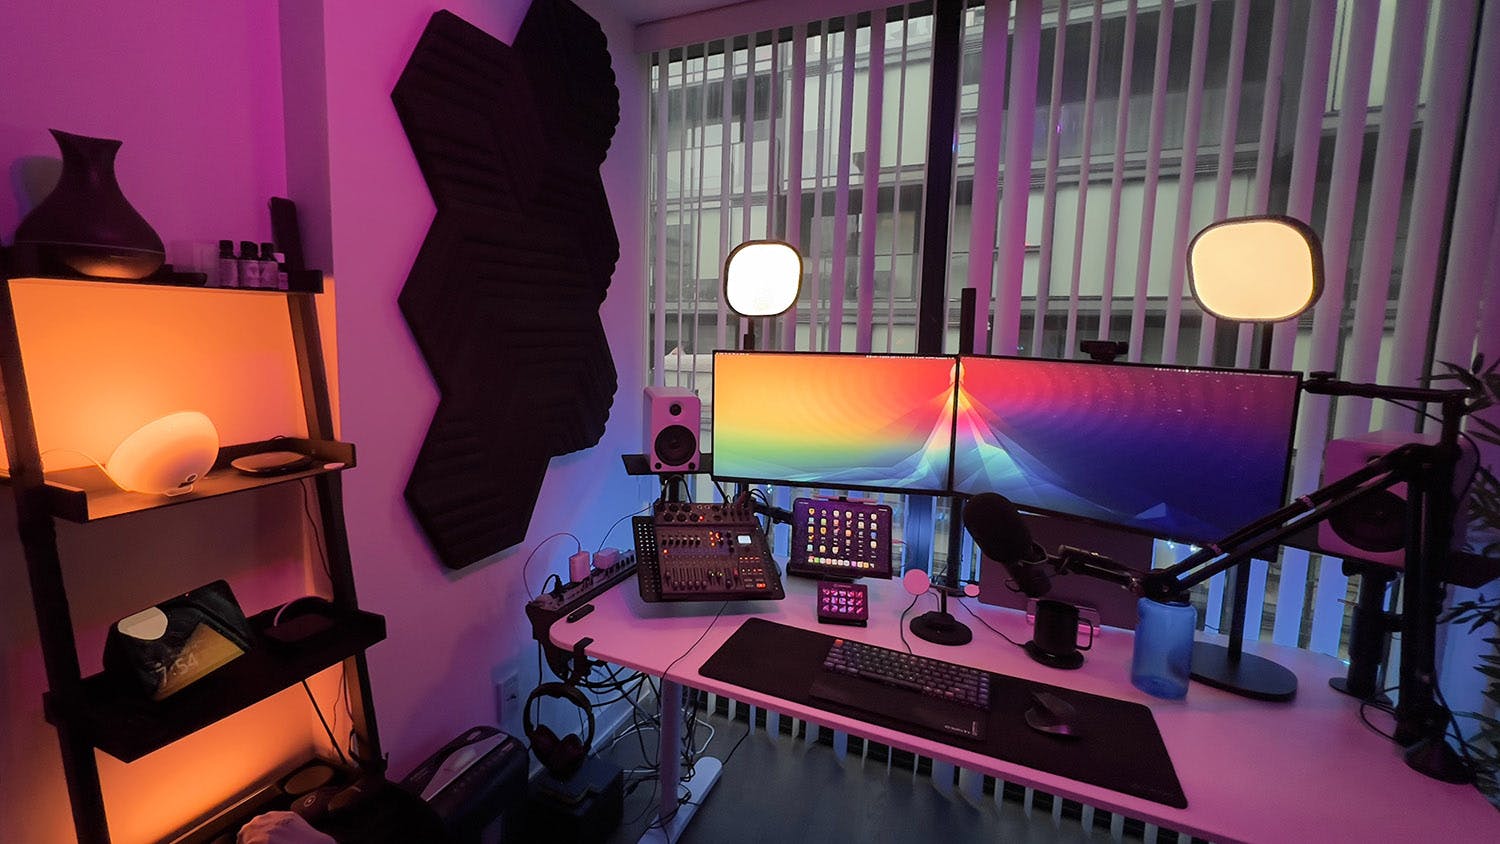 Photo of my desk setup with pink and warm yellow Philips Hue lights. My white desk is composed with 2 screens with a colorful screen background. Two white speakers in each side of the desk. A gray keyboard and a black mouse on a black pad. A microphone on a black arm attached to the right side of the desk.